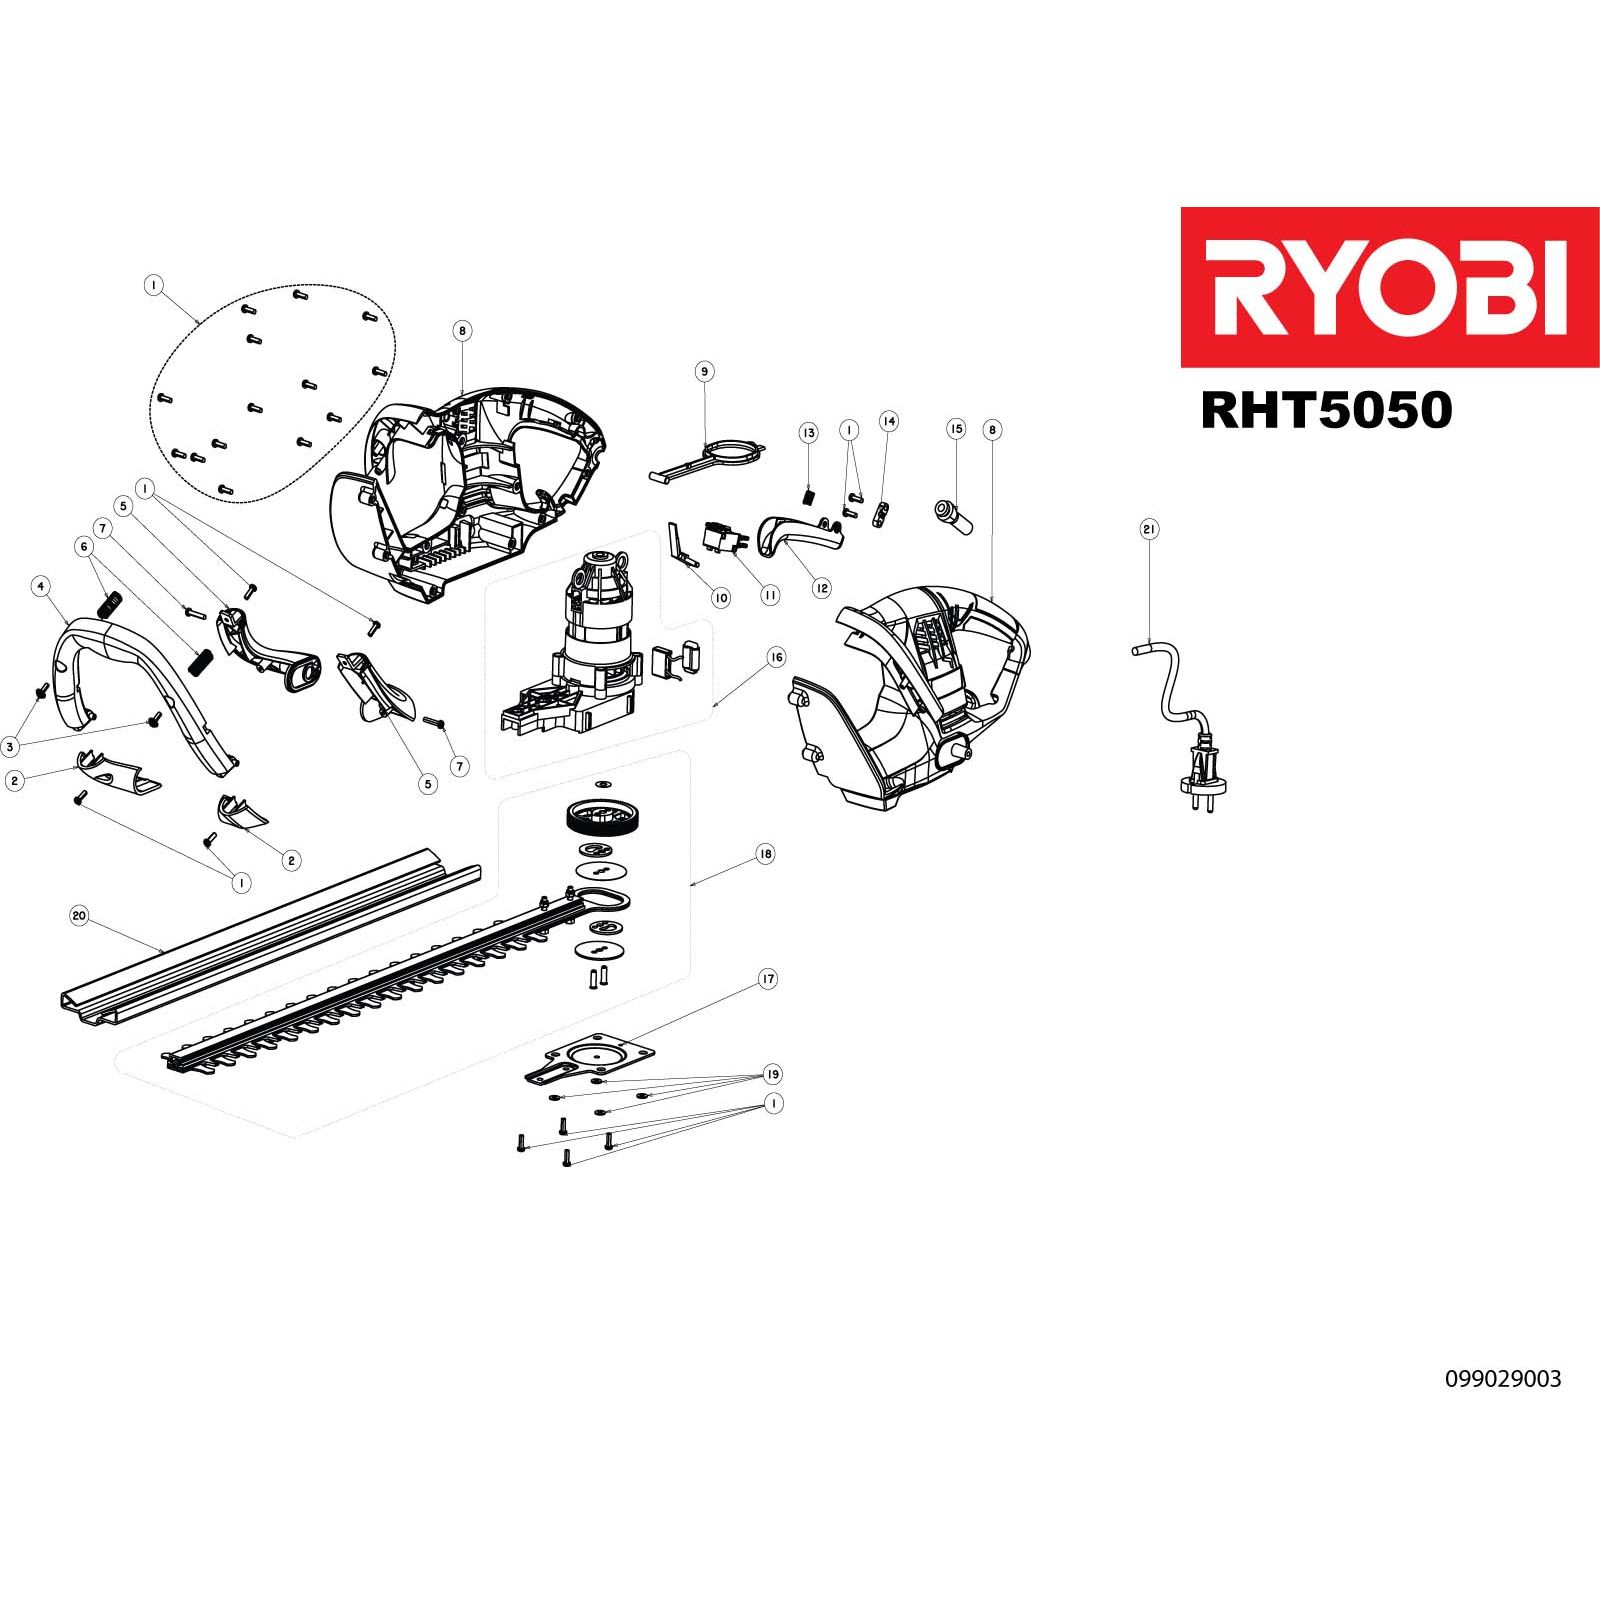 Ryobi Hedge Trimmer Parts List Free Download Nude Photo Gallery